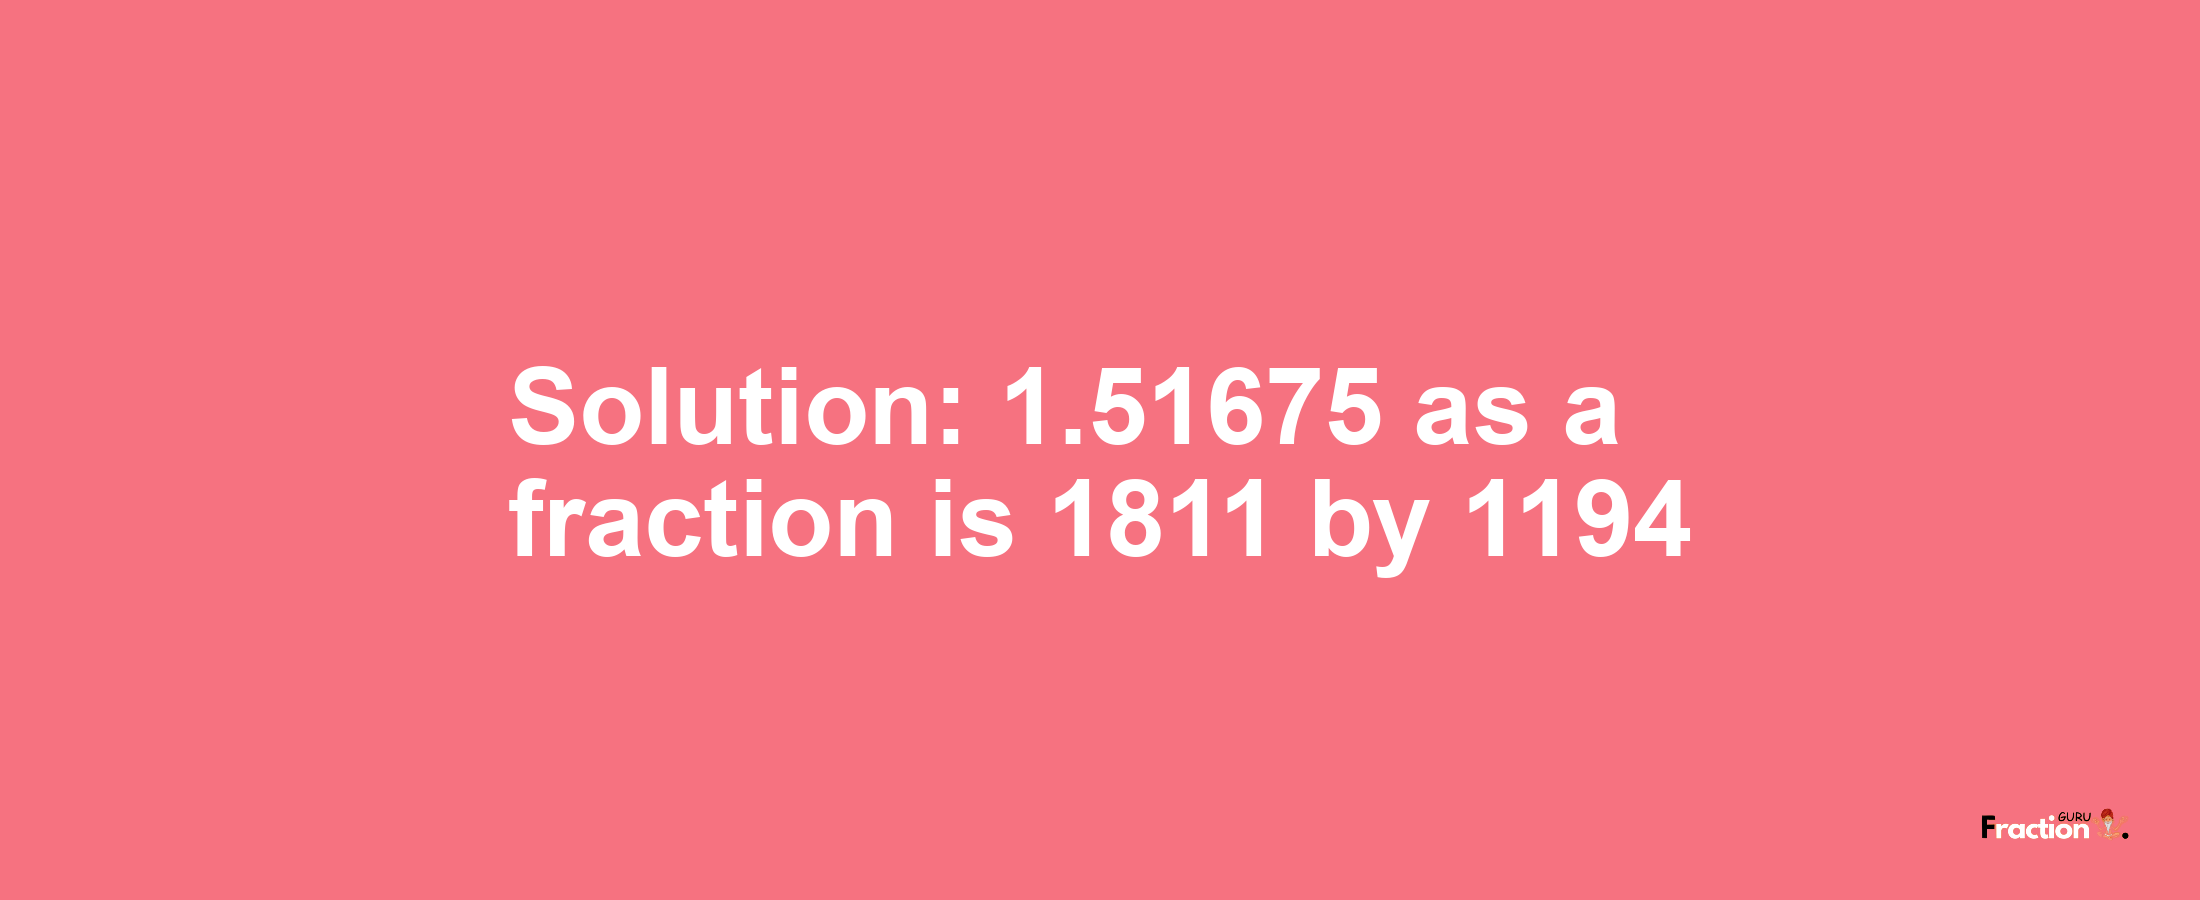 Solution:1.51675 as a fraction is 1811/1194